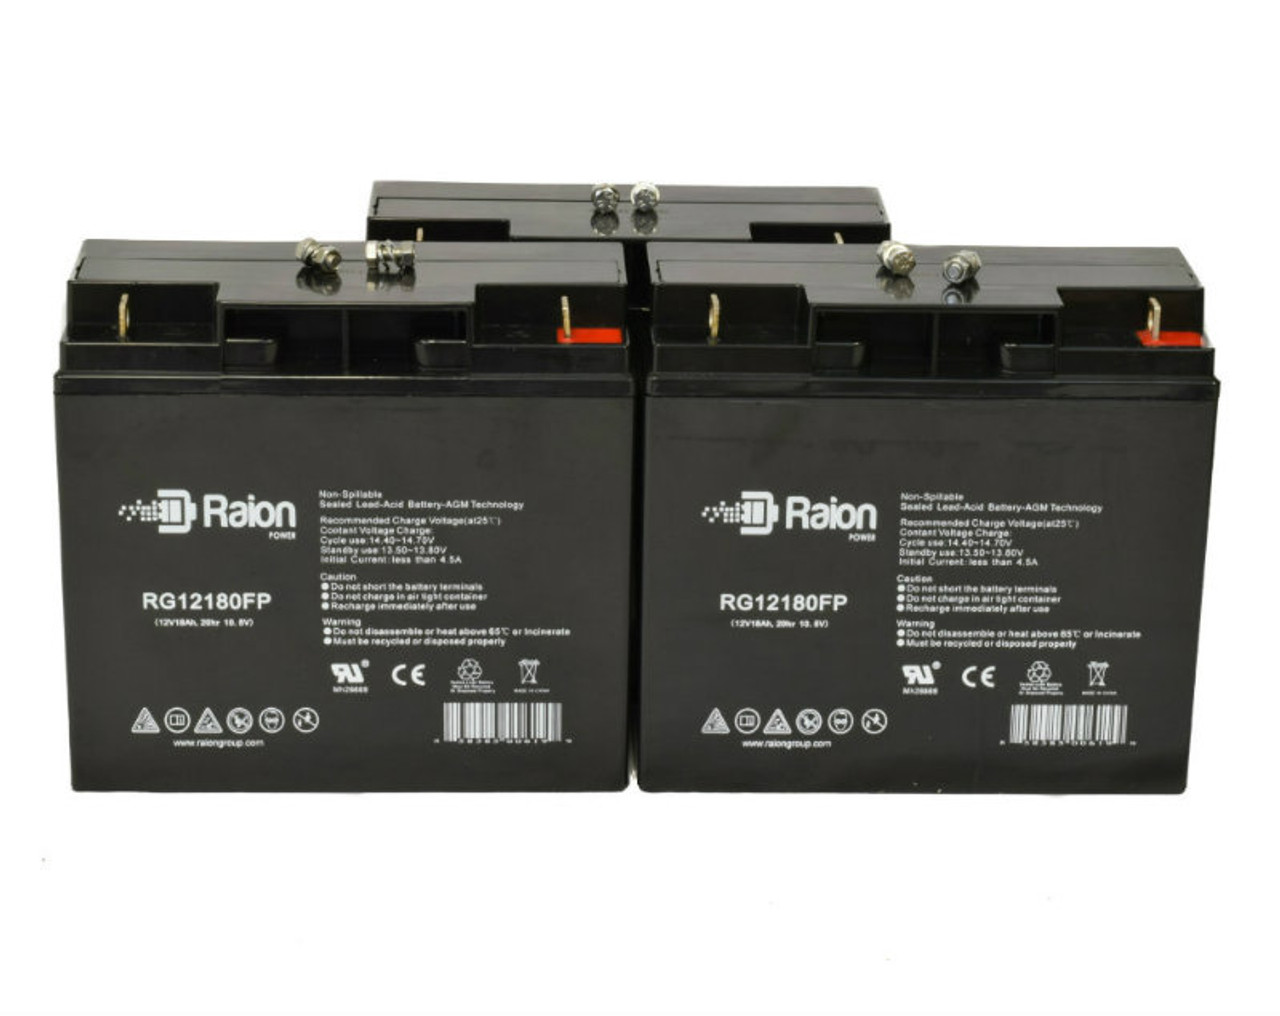 Raion Power Replacement 12V 18Ah Battery for Zonne Energy FP12180 - 3 Pack